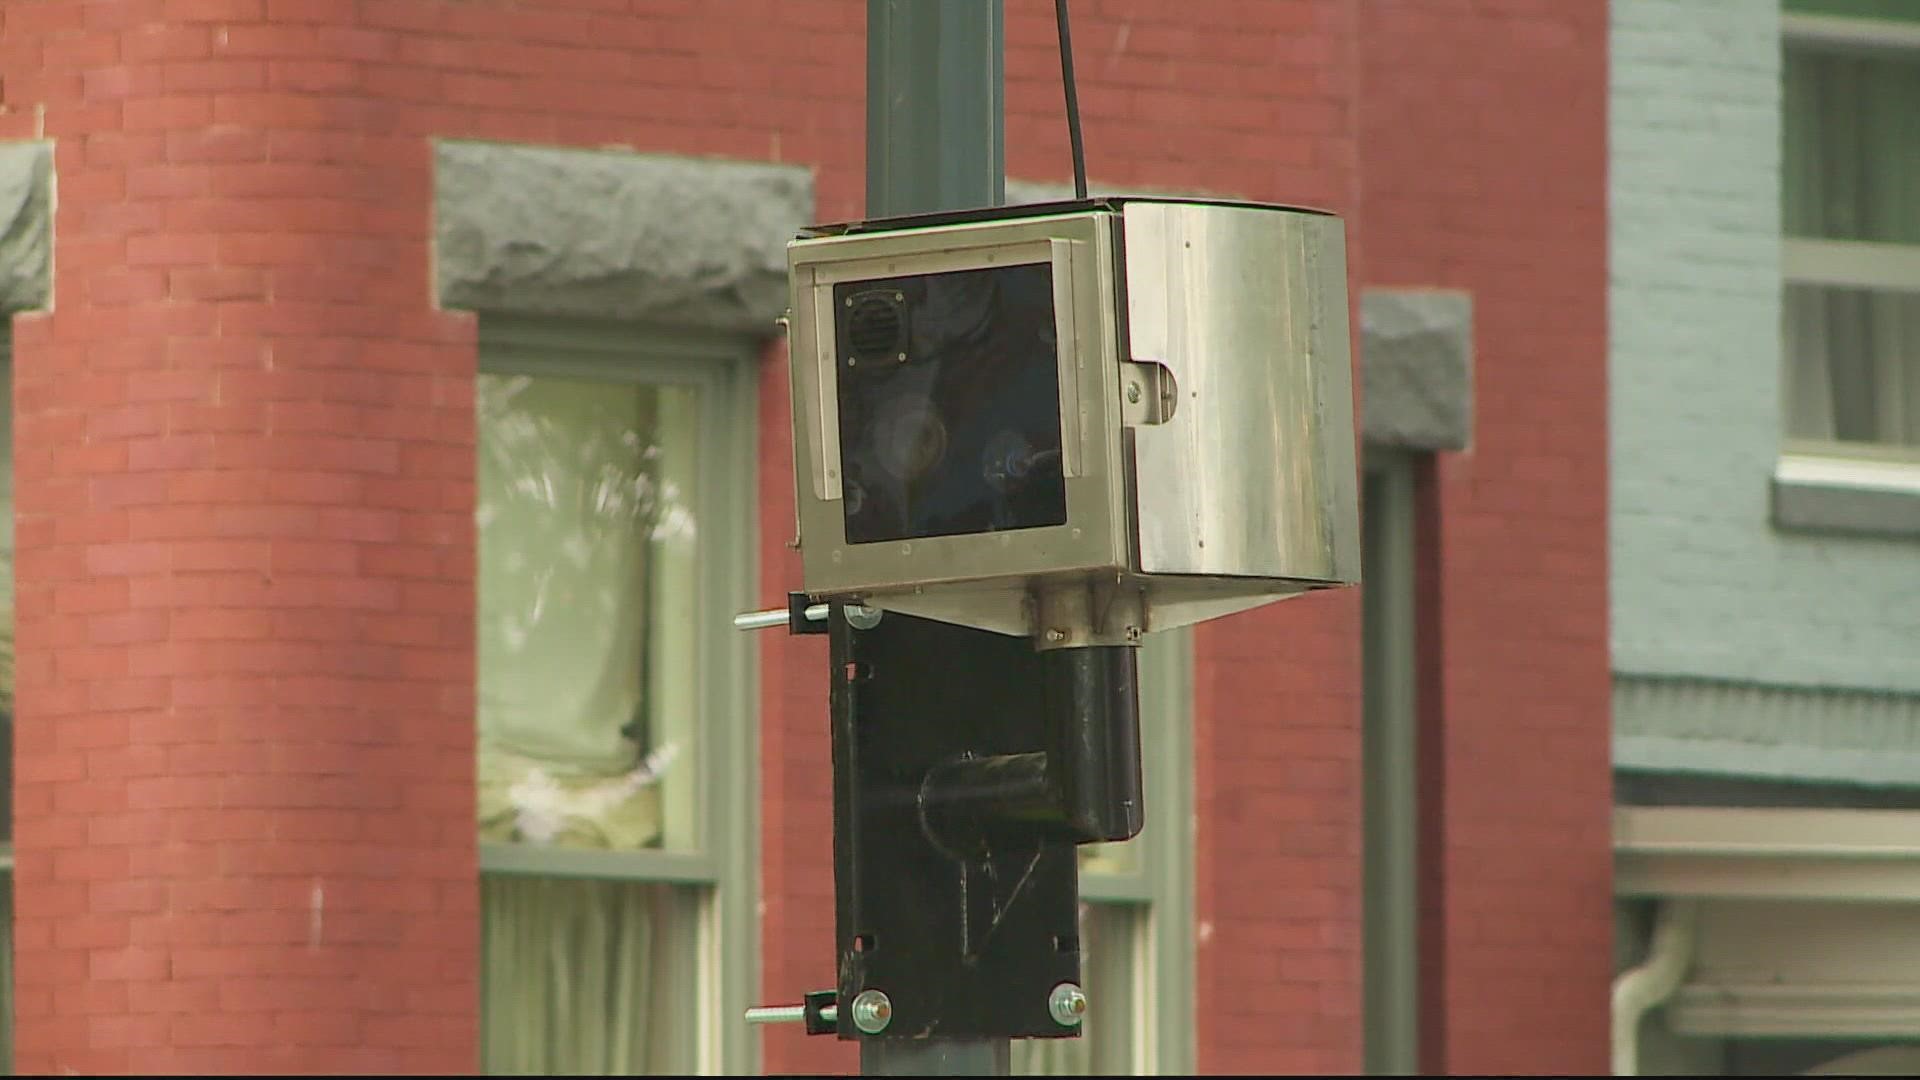 On Tuesday, the city council will introduce and have their first reading to consider photo speed monitoring devices. Most parents agreed changes need to be made.